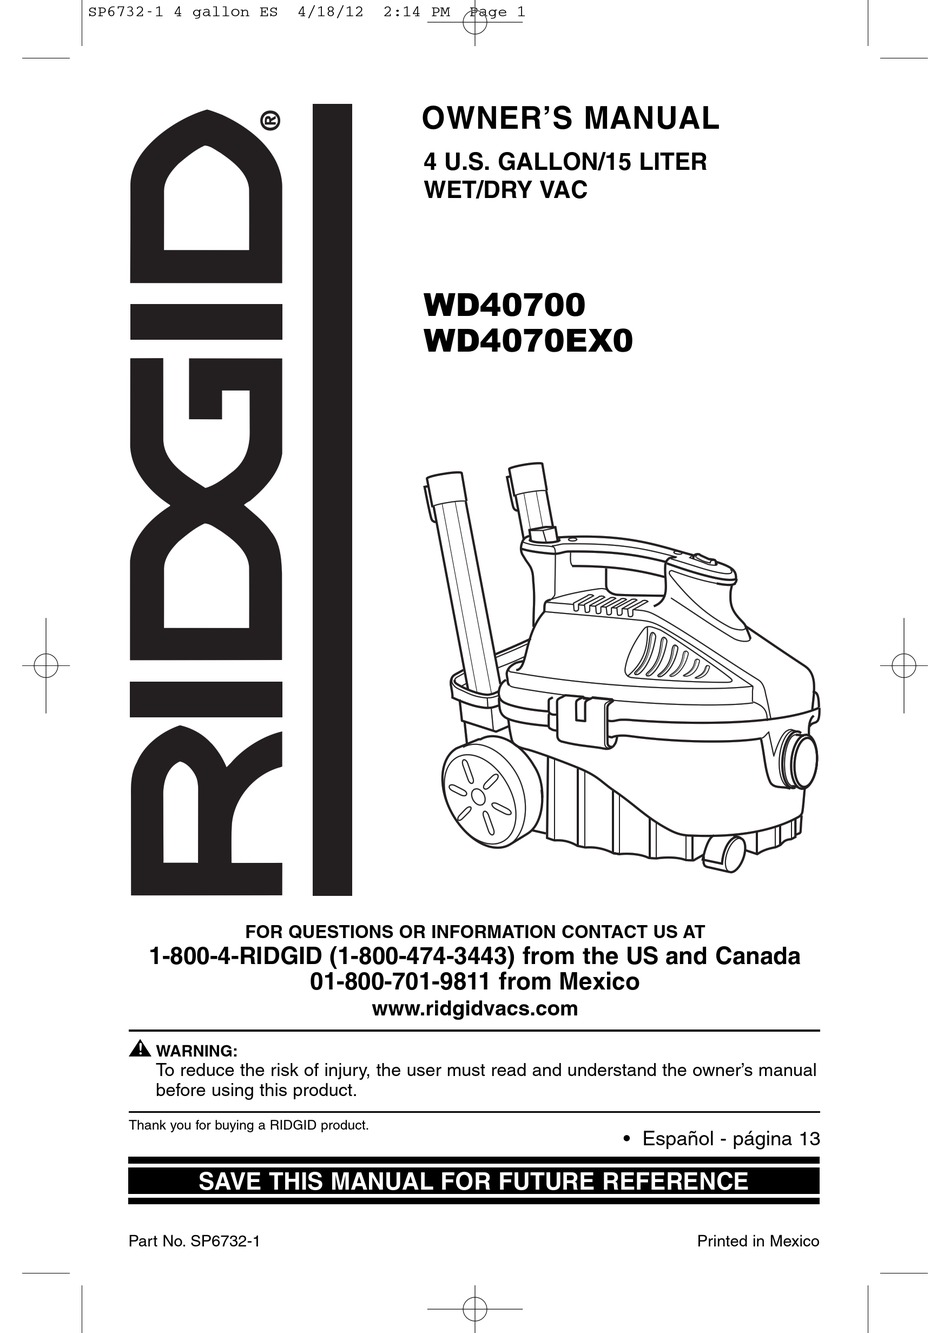 RIDGID WD40700 OWNER'S MANUAL & INSTALLATION INSTRUCTIONS Pdf Download